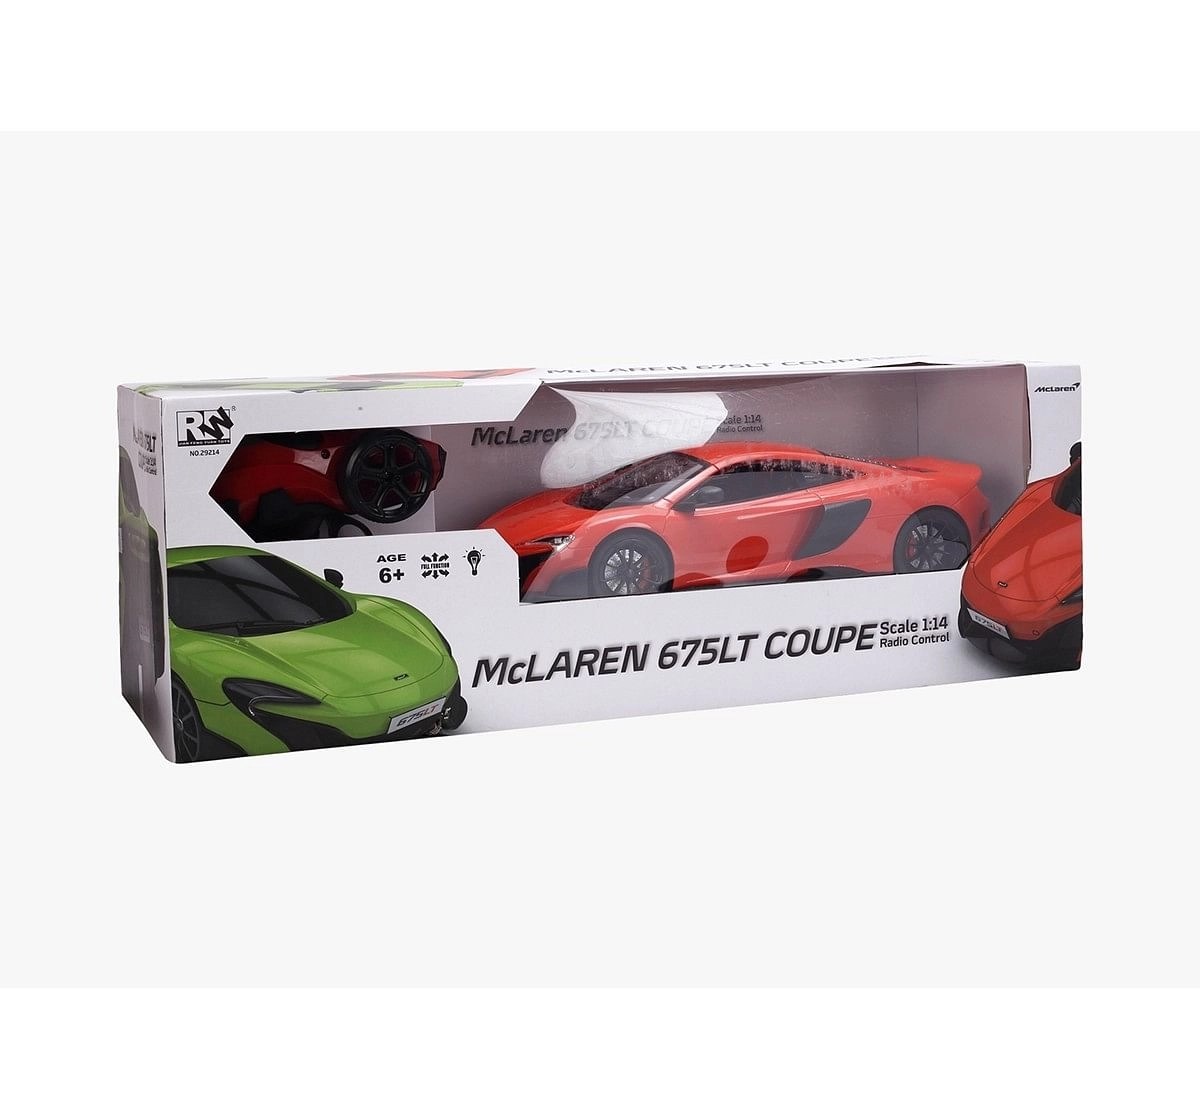 RW 1:14 McLaren 675LT Coupe Remote Control Car Remote Control Toys for Kids age 6Y+ (Green)